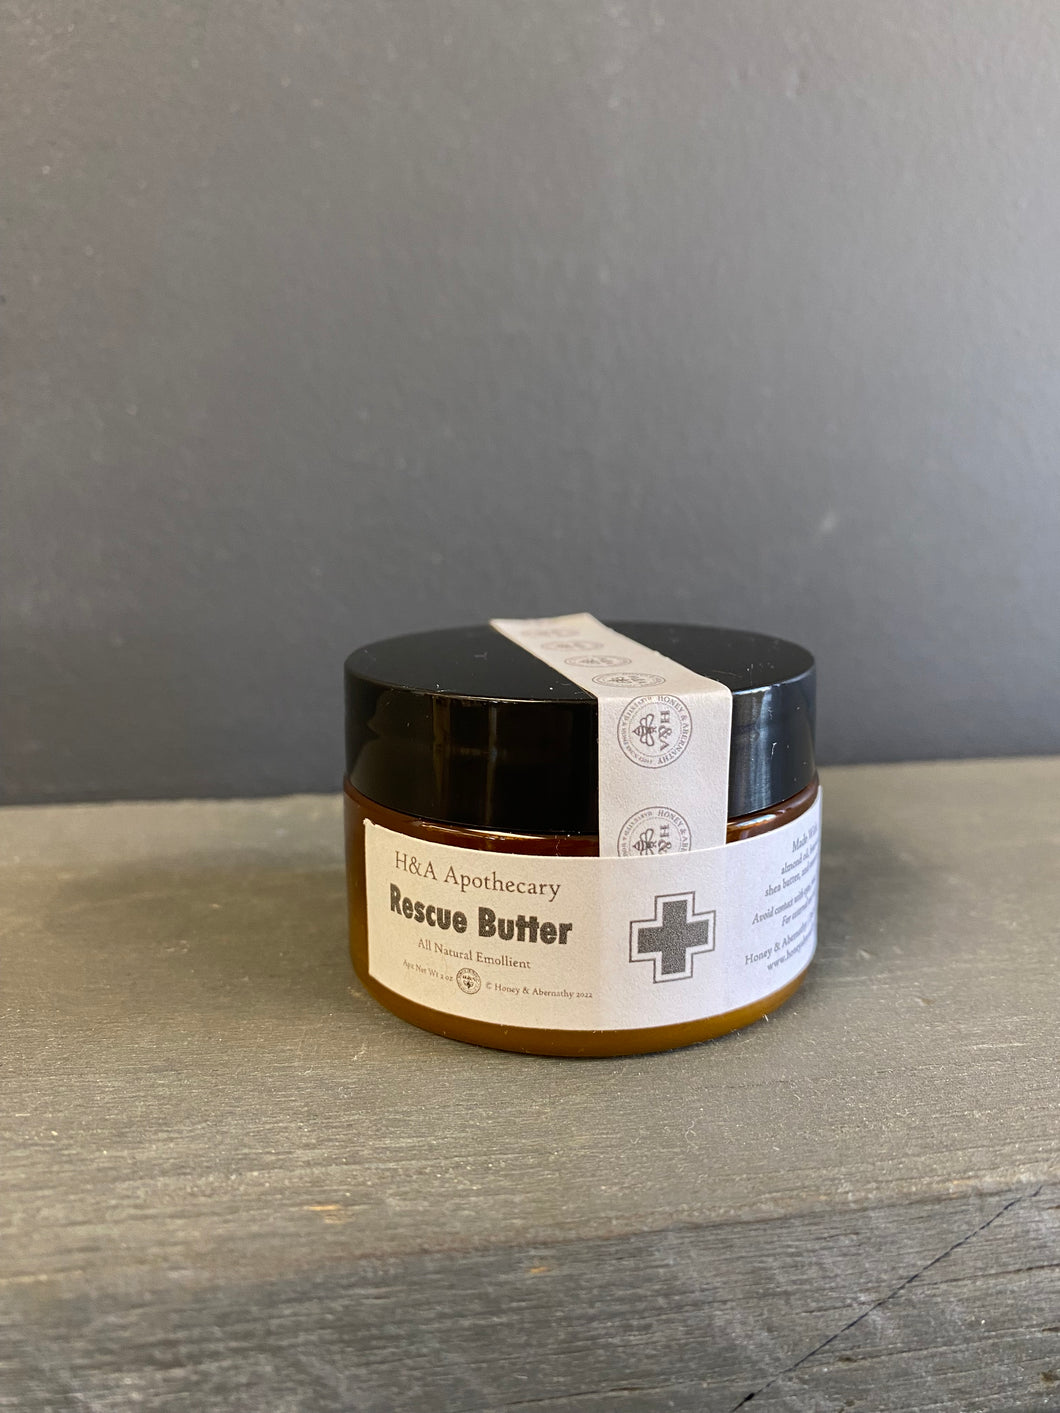 H&A Apothecary Rescue Butter